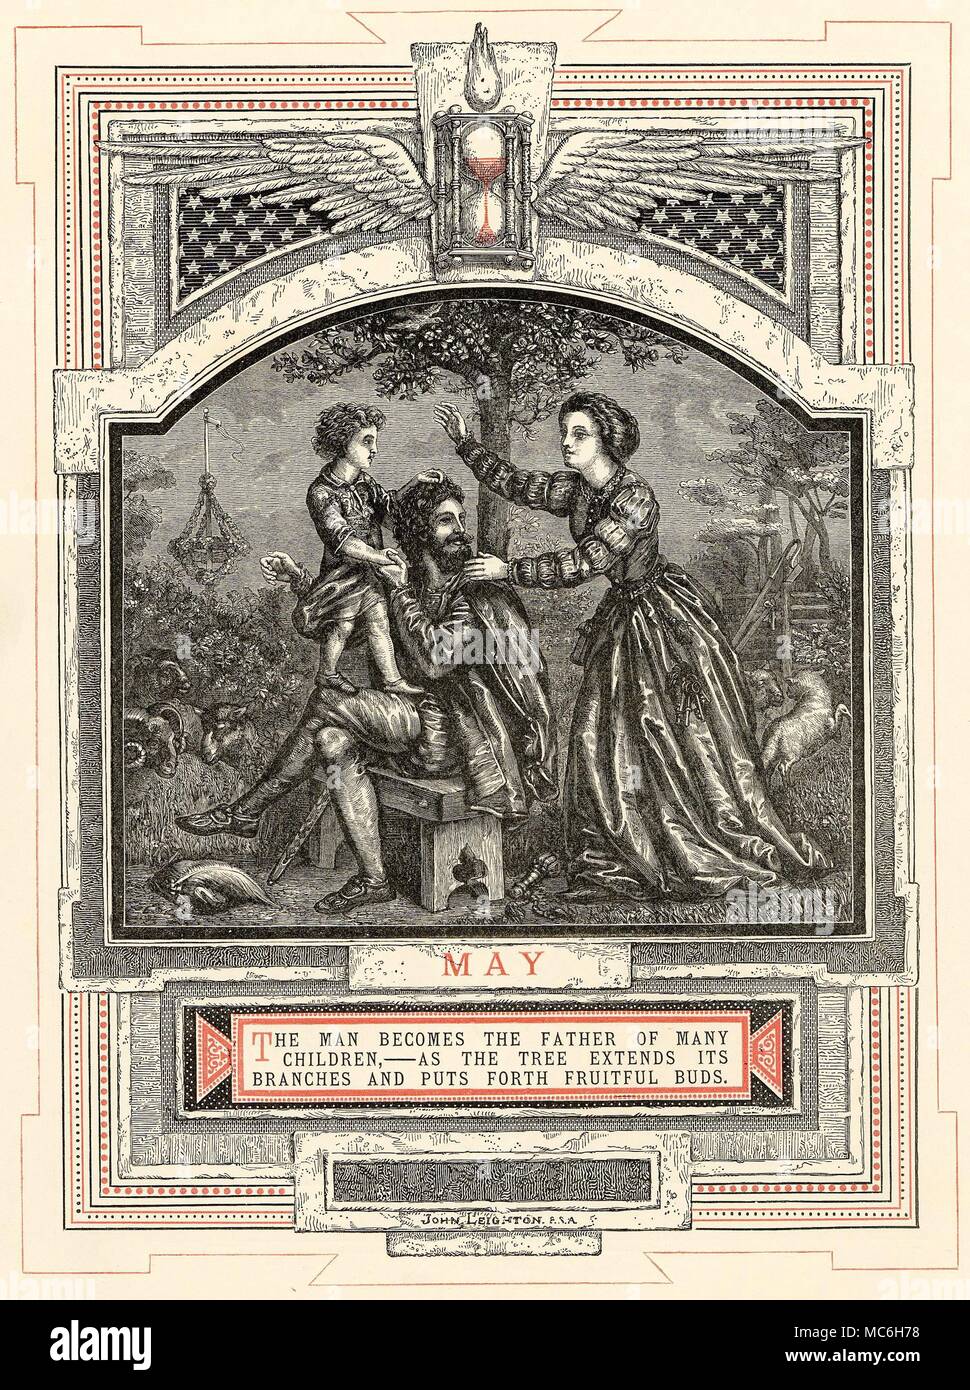 ASTROLOGY - MONTHS OF THE YEAR - MAY The month of May, from the series by John Leighton, The Life of Man, 1866. The twelve signs (in this case Taurus) are associated with each of the months during which the Sun is in this zodiac sign. A distinctive stage in the twelve stages of Man's life is also linked with the image - in this case, May is linked with the 'Man and Father'. By the fifth month of the year, the winged hour-glass is running well. Note the signs of the festivities of the Month - the maypole in the background, the leaping lambs, and so on. Stock Photo